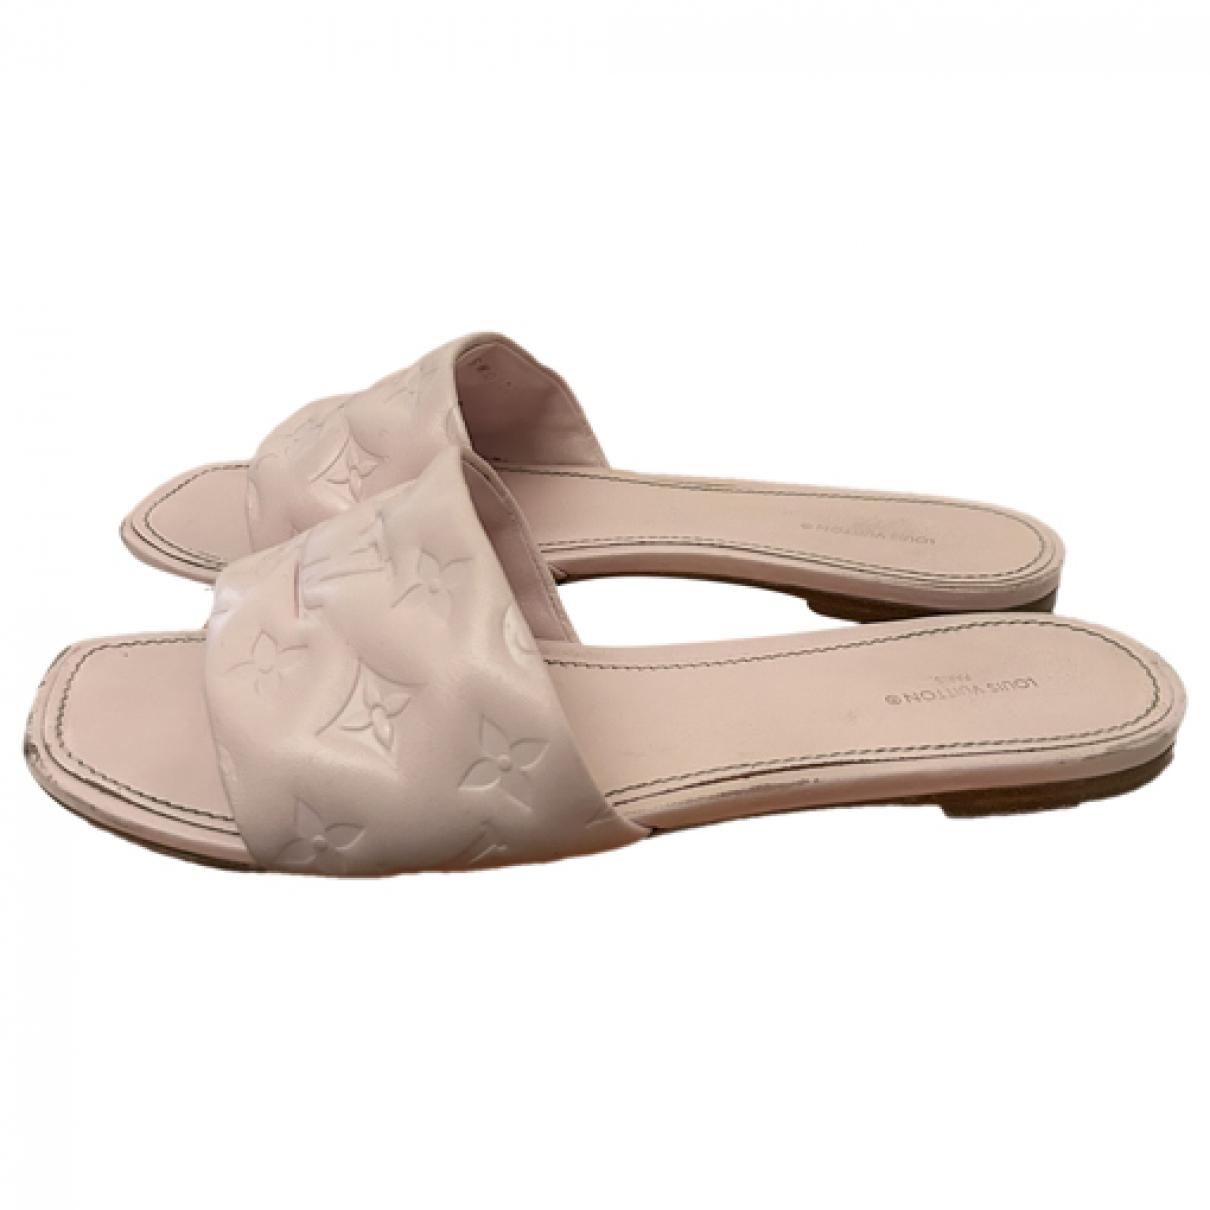 Buy Cheap Women's Louis Vuitton High quality goat skin Inside ladies sandals  #99900699 from